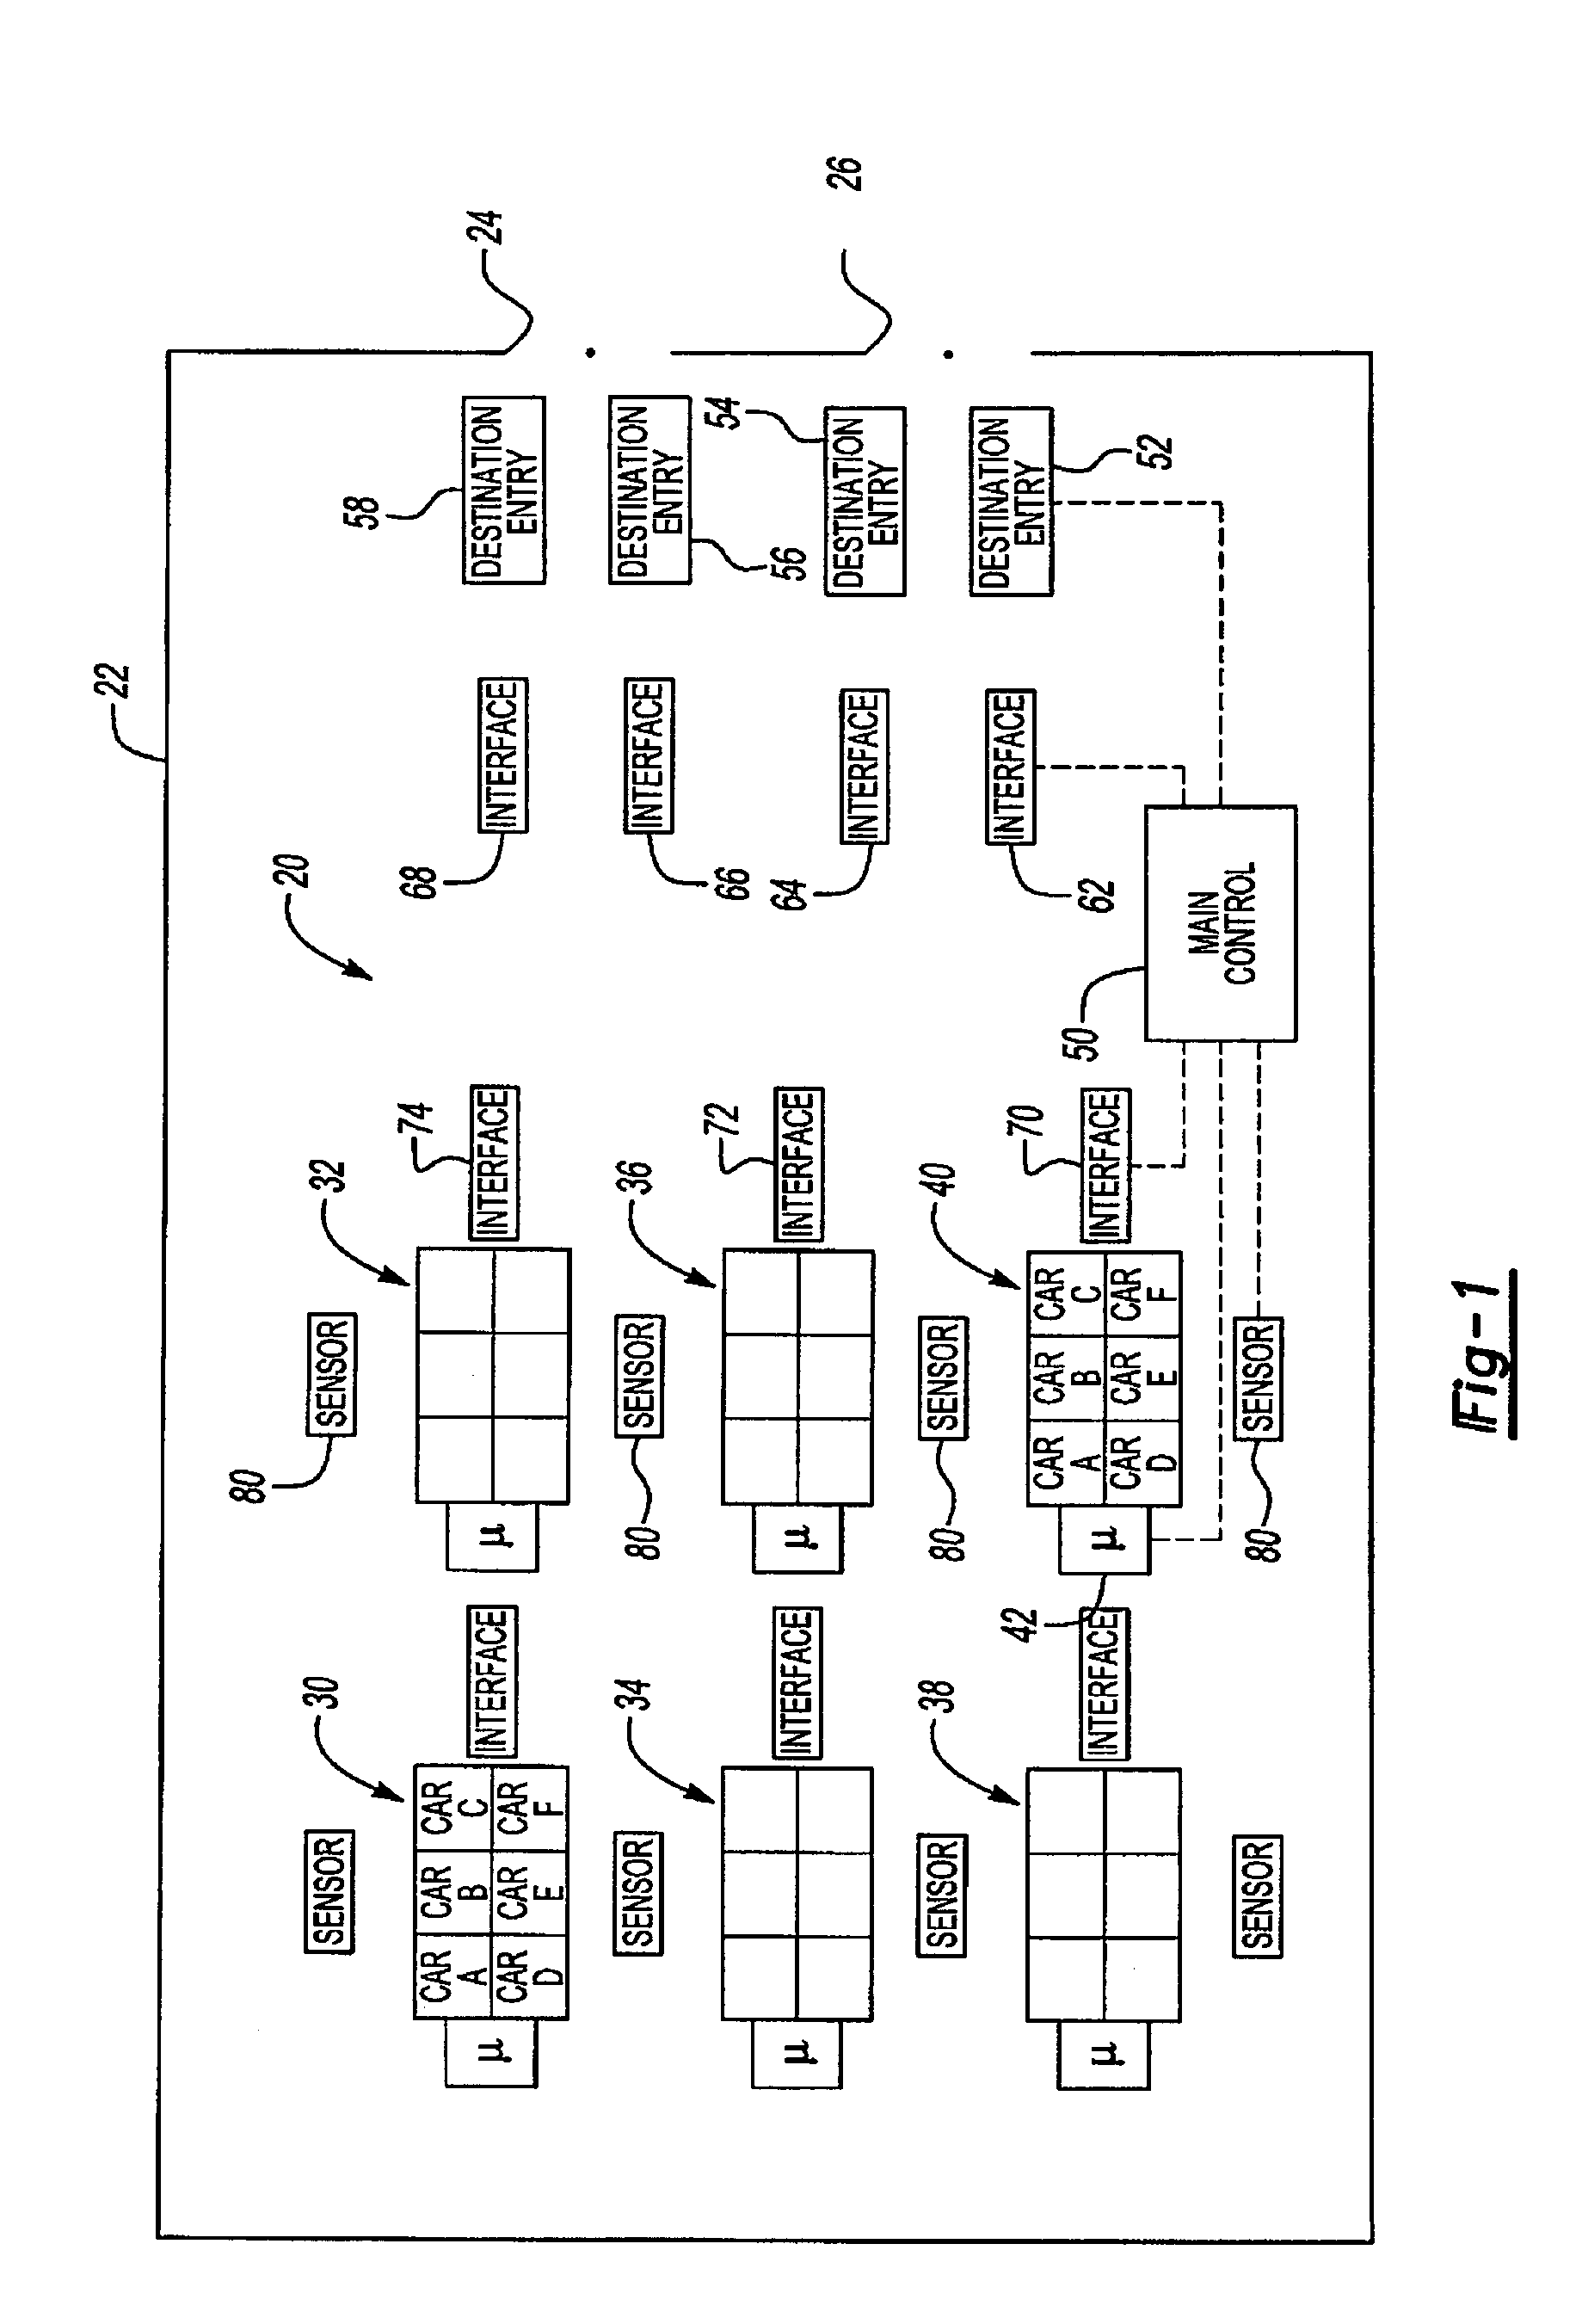 Destination entry system with delayed elevator car assignment